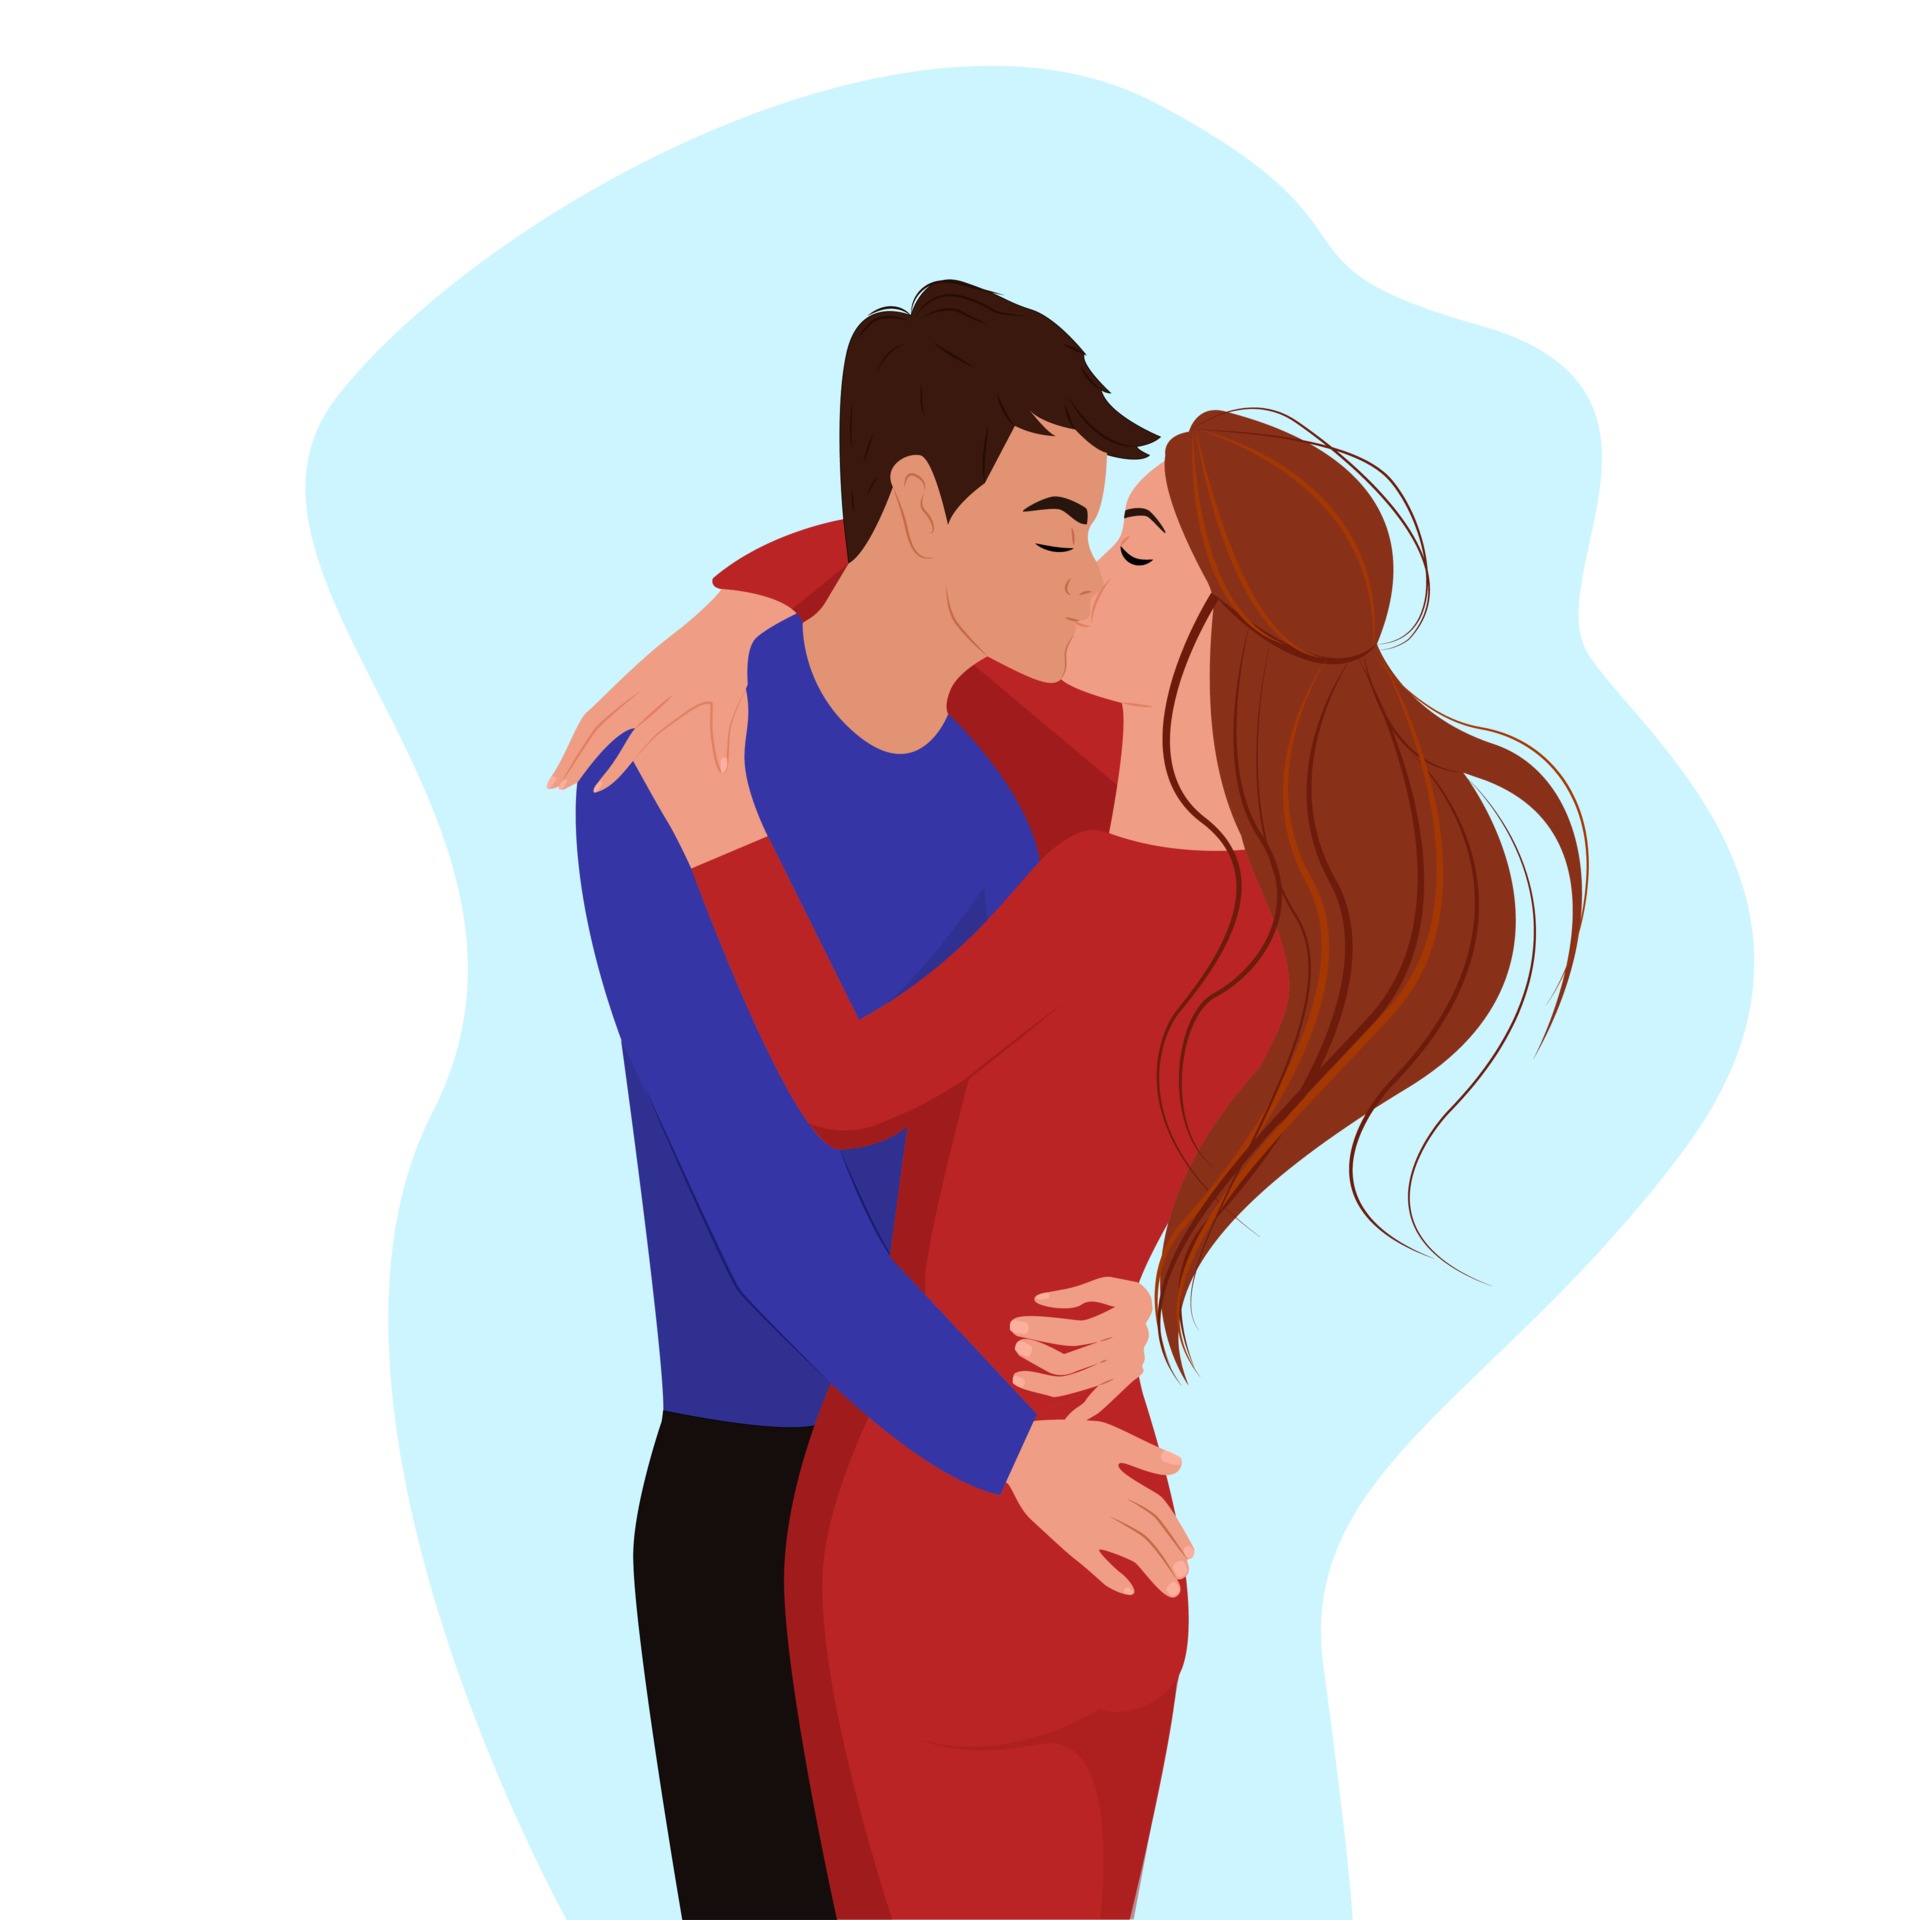 two-lovers-hugging-and-kissing-guy-hugging-a-girl-by-the-waist-and-kissing-couple-in-love-valentines-day-illustration-in-flat-style-vector.jpg